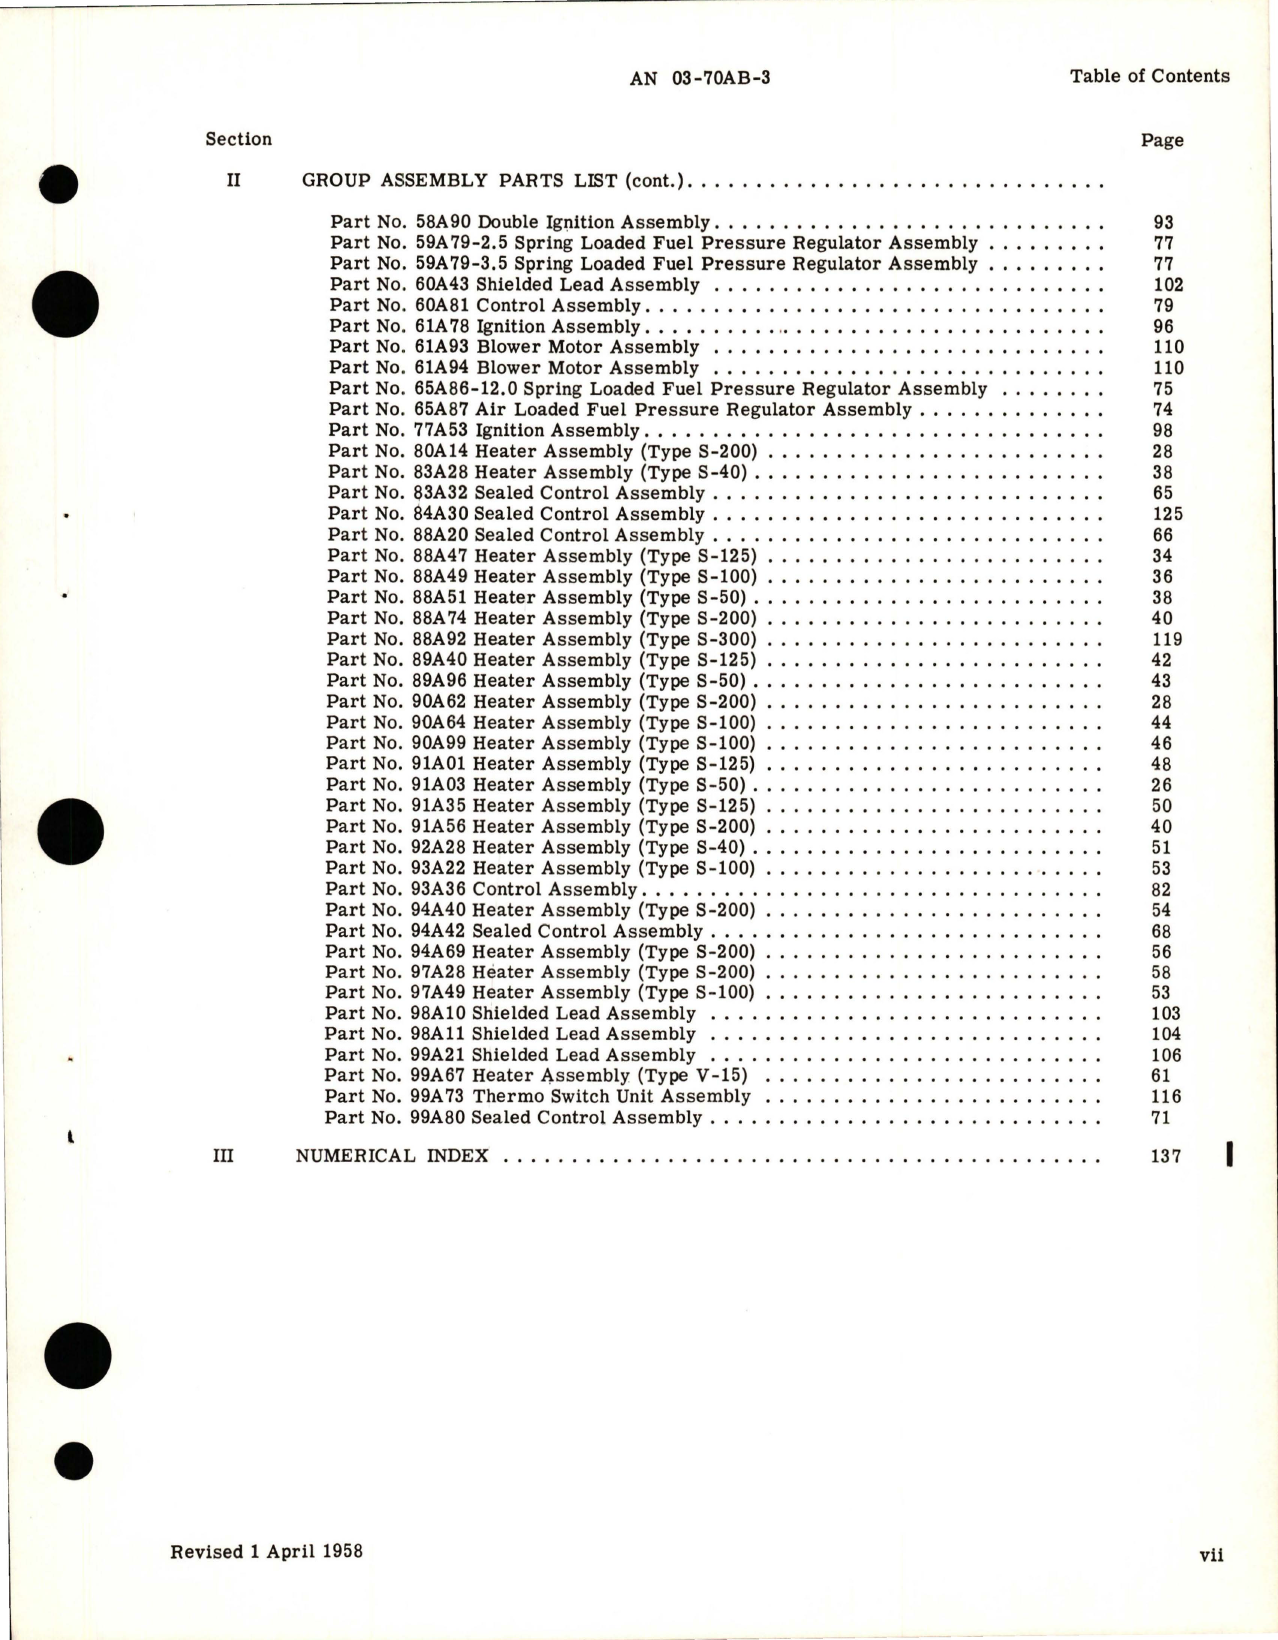 Sample page 9 from AirCorps Library document: Illustrated Parts Breakdown for Aircraft Heaters and Accessories 